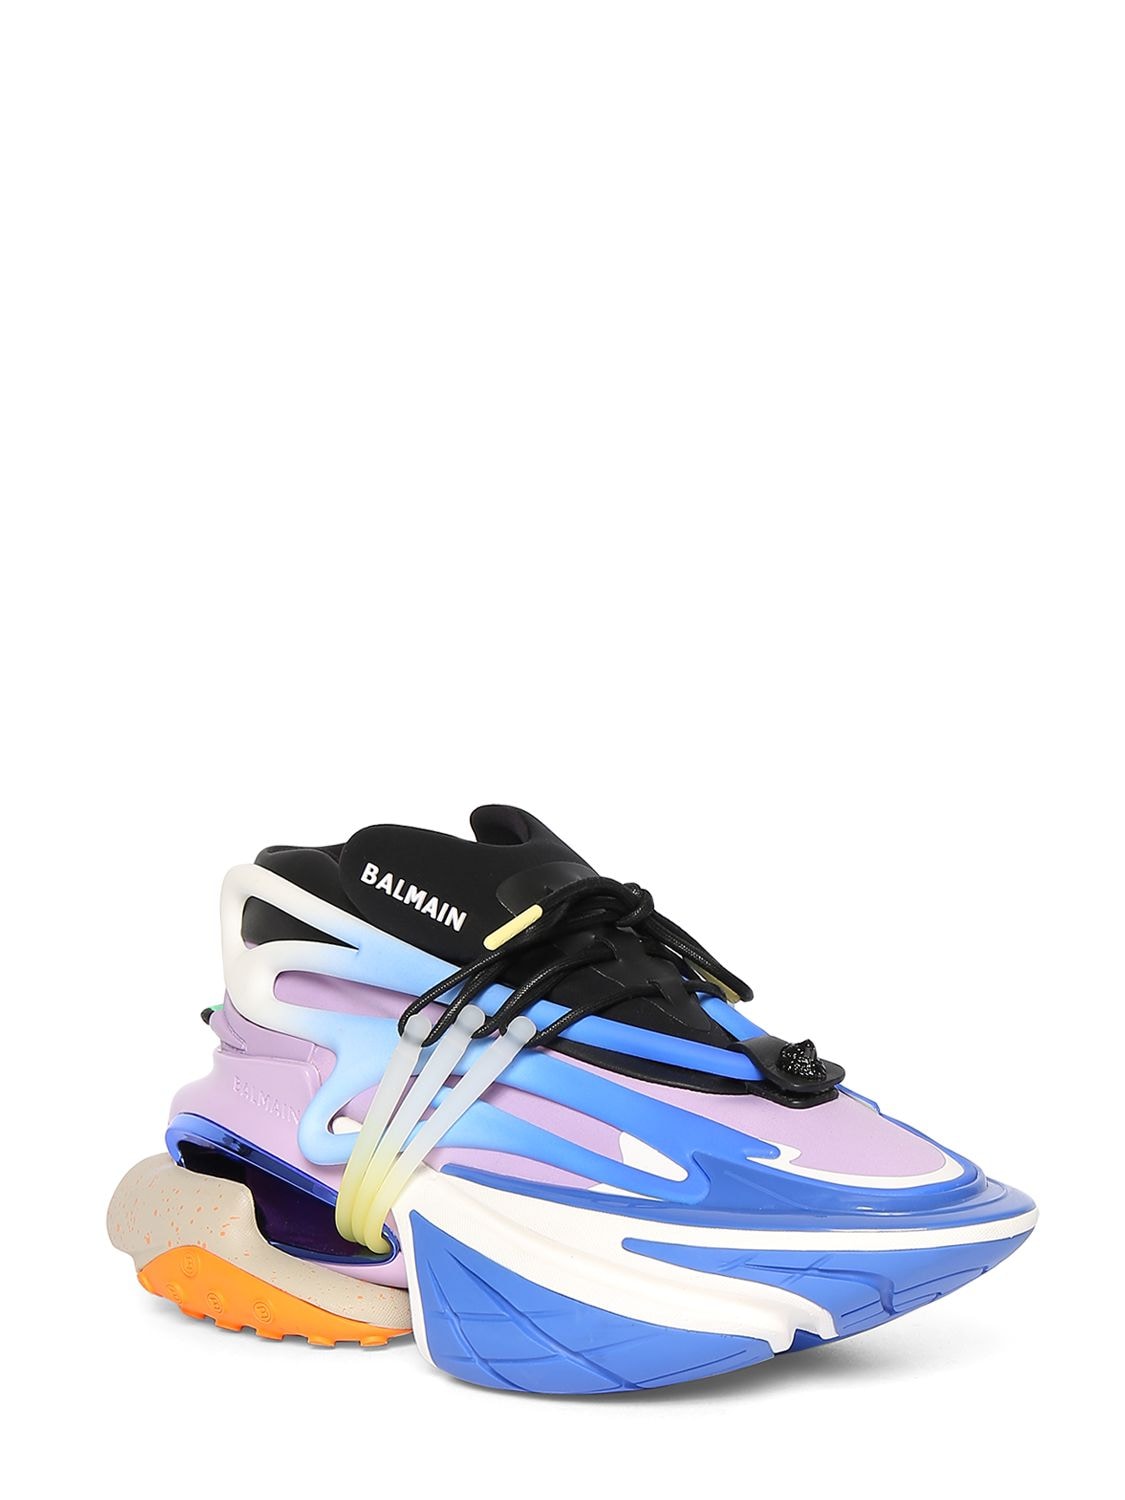 Balmain Unicorn Low-top Trainers In Neoprene And Leather In Blue | ModeSens